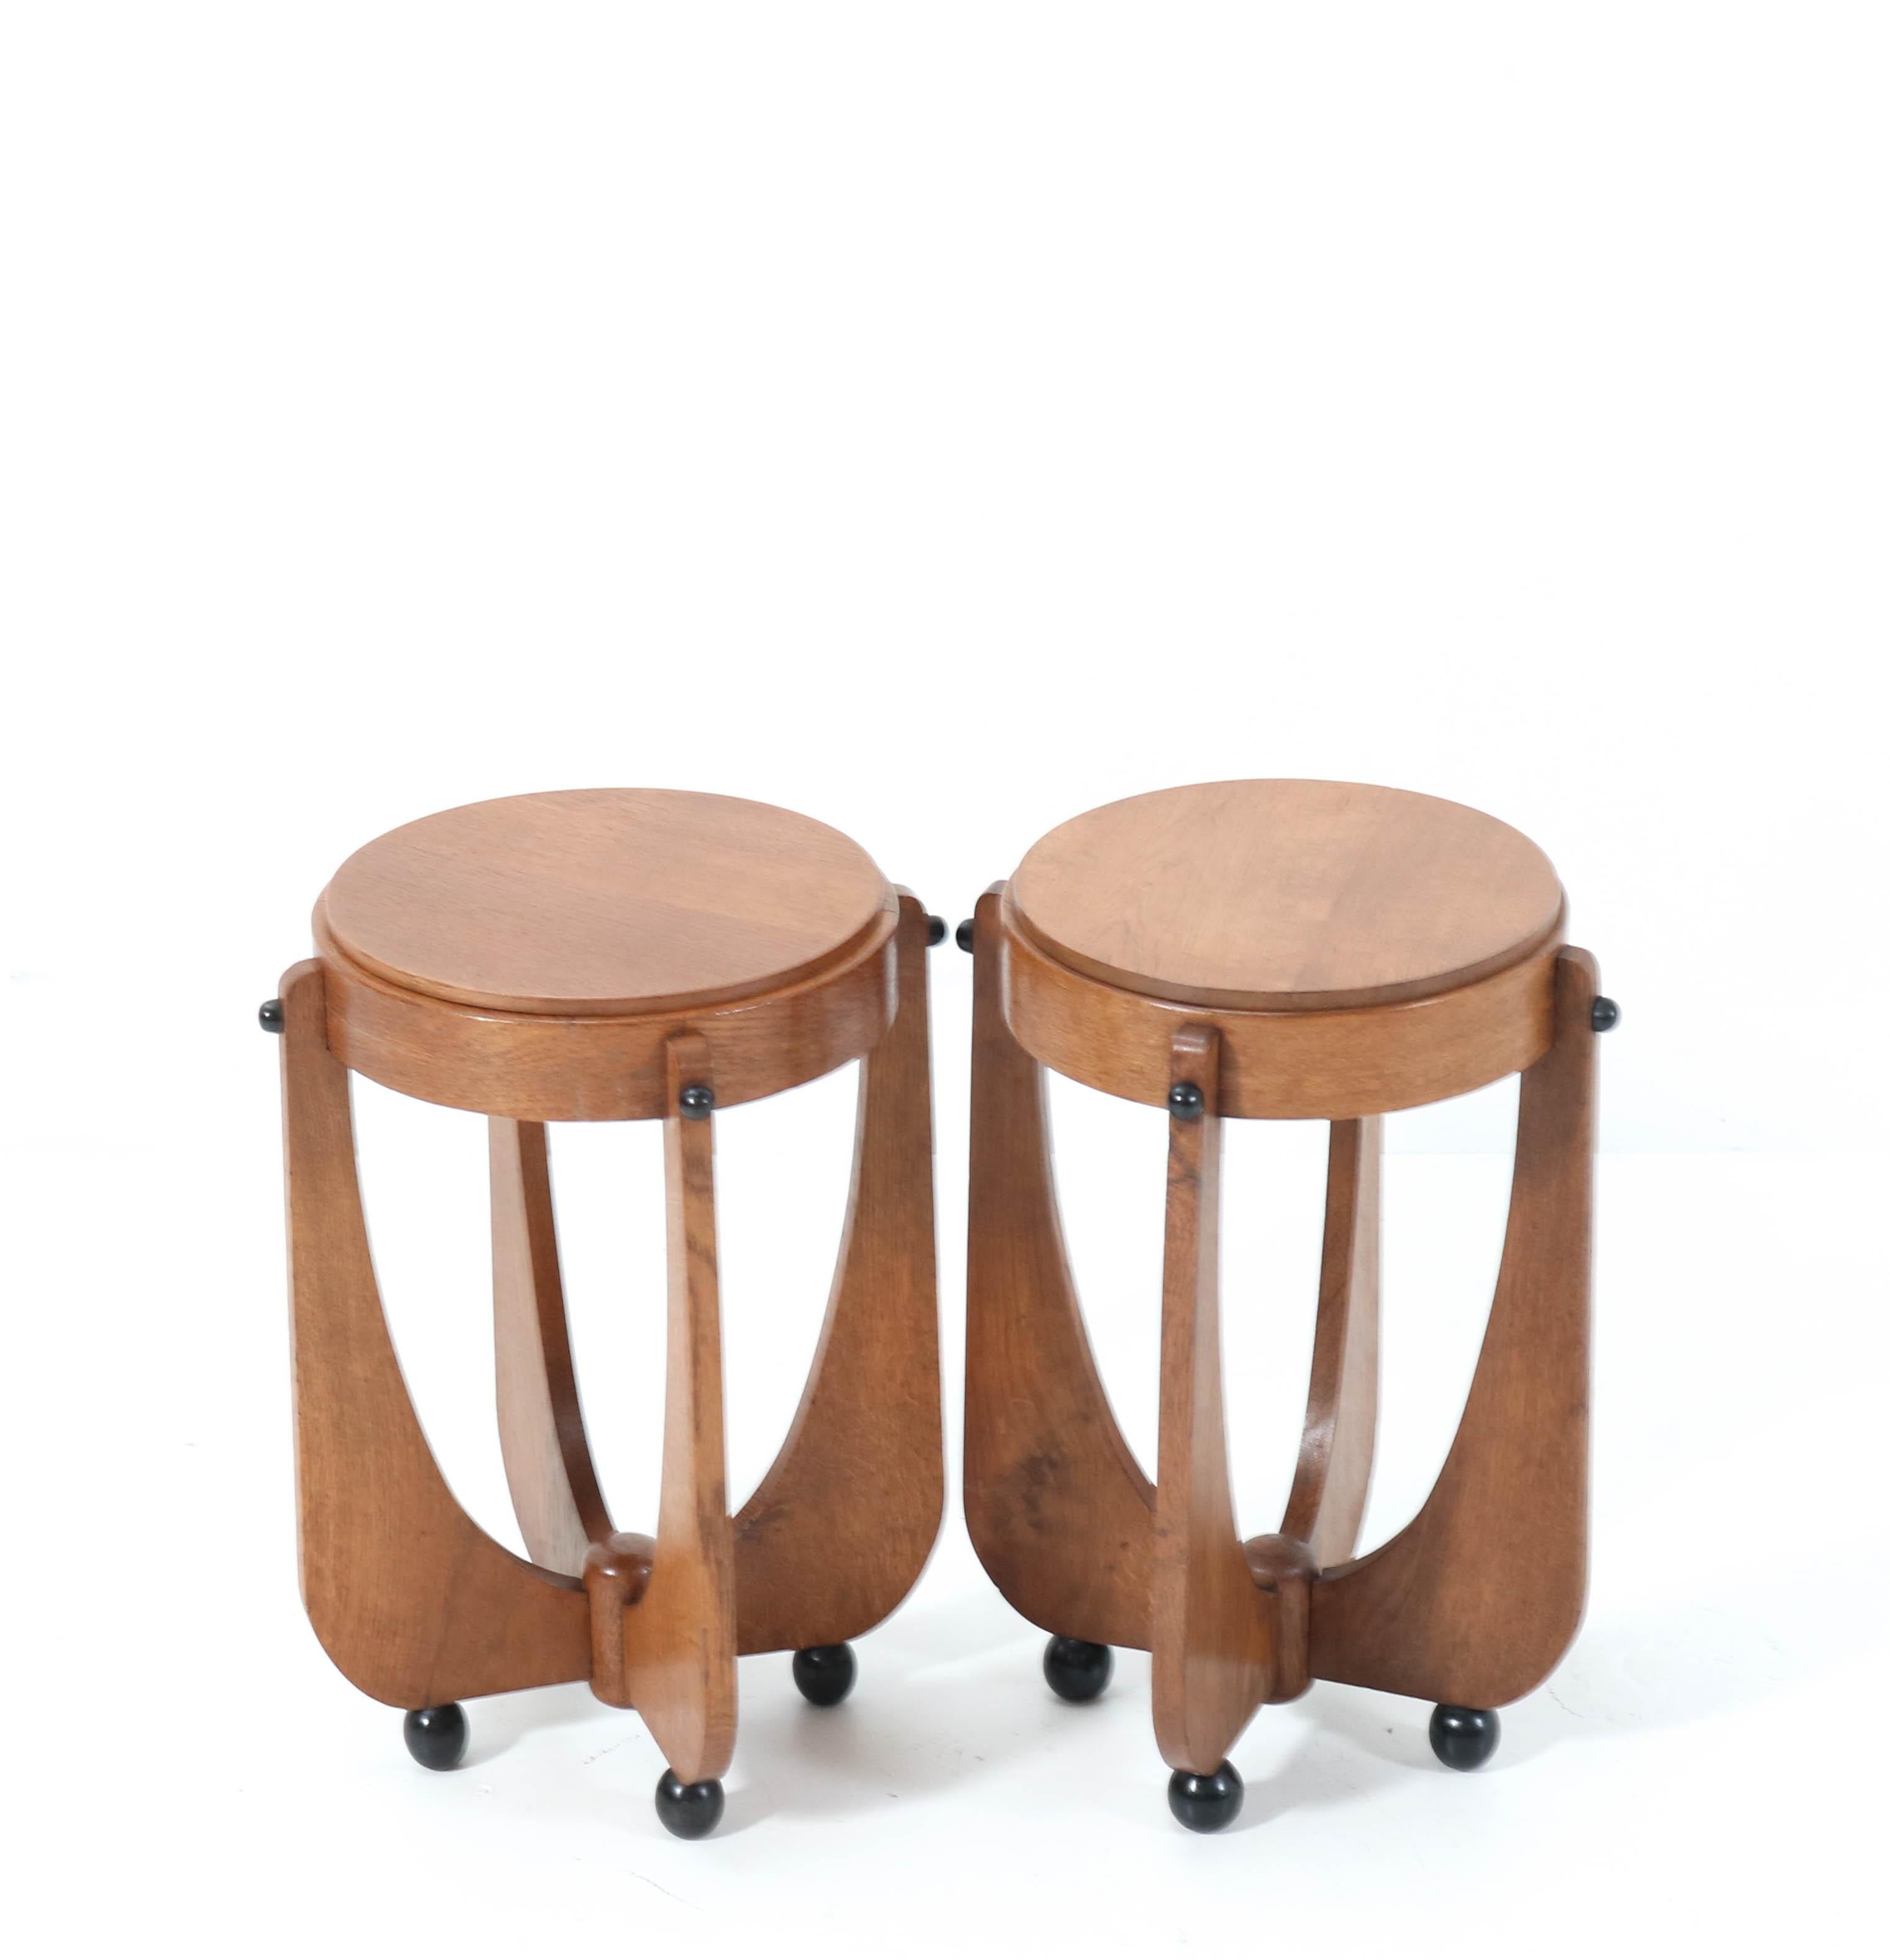 Magnificent and rare pair of Art Deco Amsterdamse School side tables.
Striking Dutch design from the 1920s.
Solid oak with original black lacquered details.
In very good condition with a beautiful patina.
Please note that there is 1 cm or 0.39